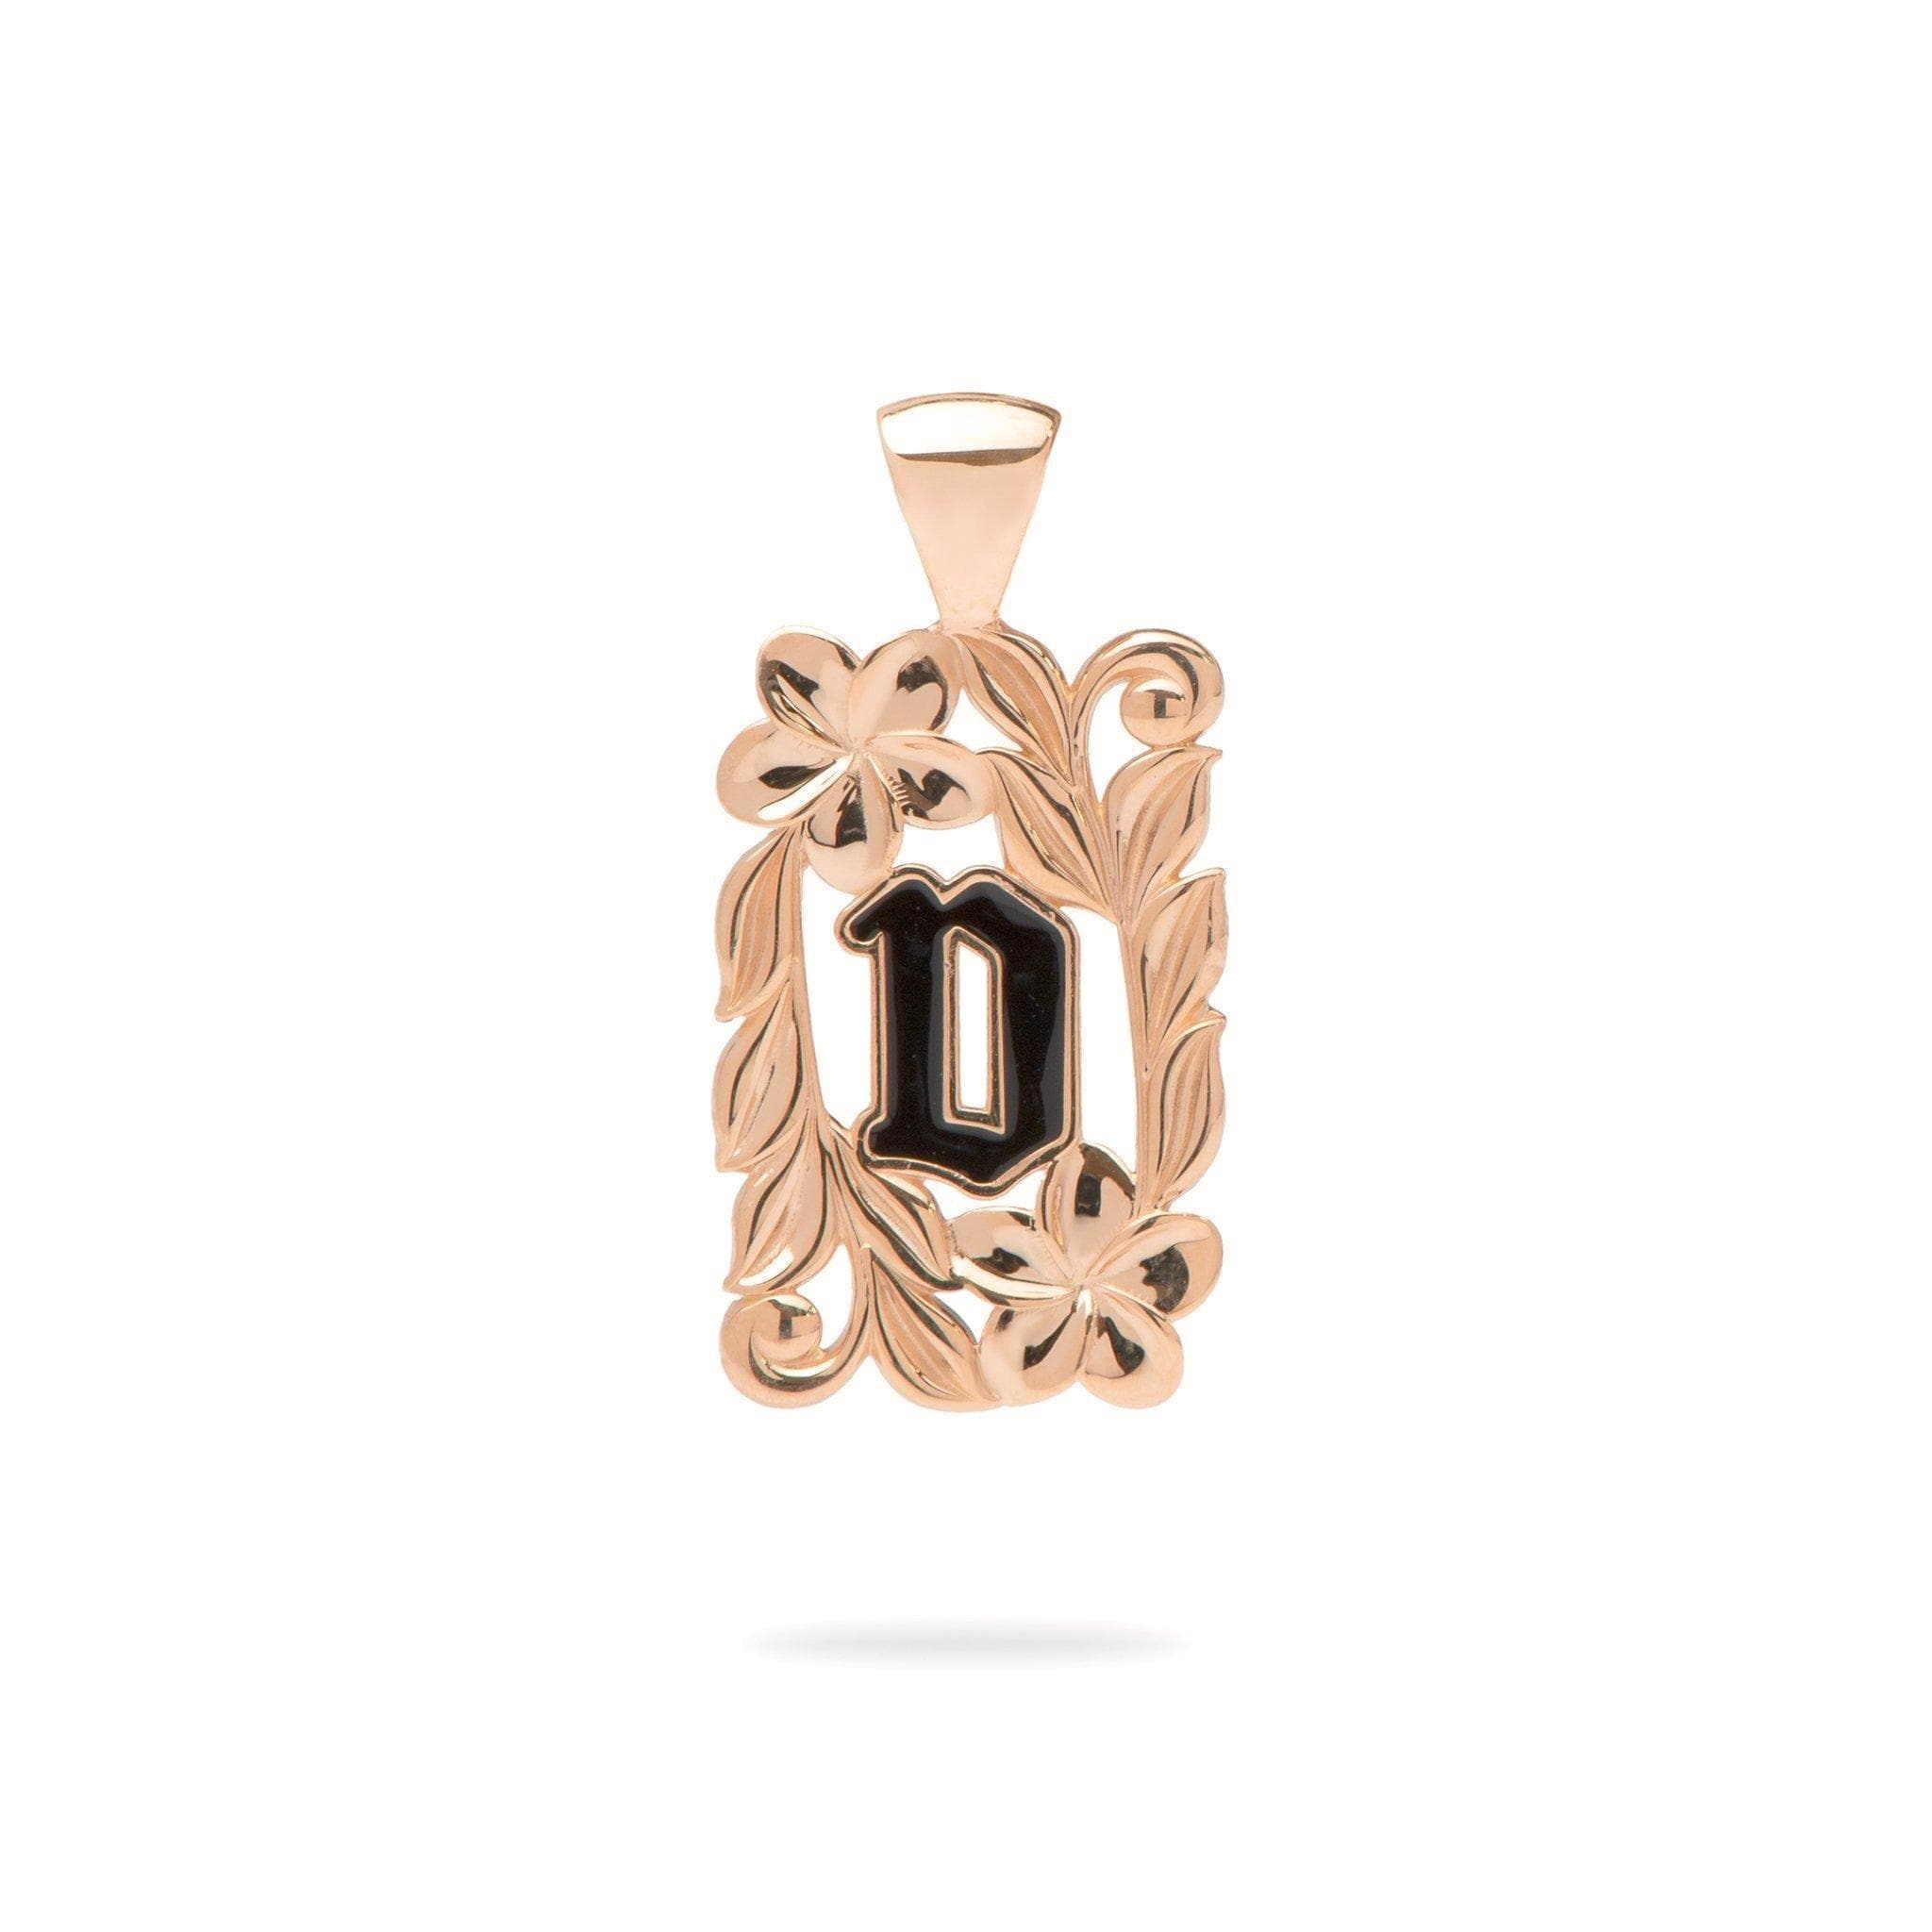 Special Order Hawaiian Heirloom Initial Pendant in Rose Gold - 014-03615-D-14R